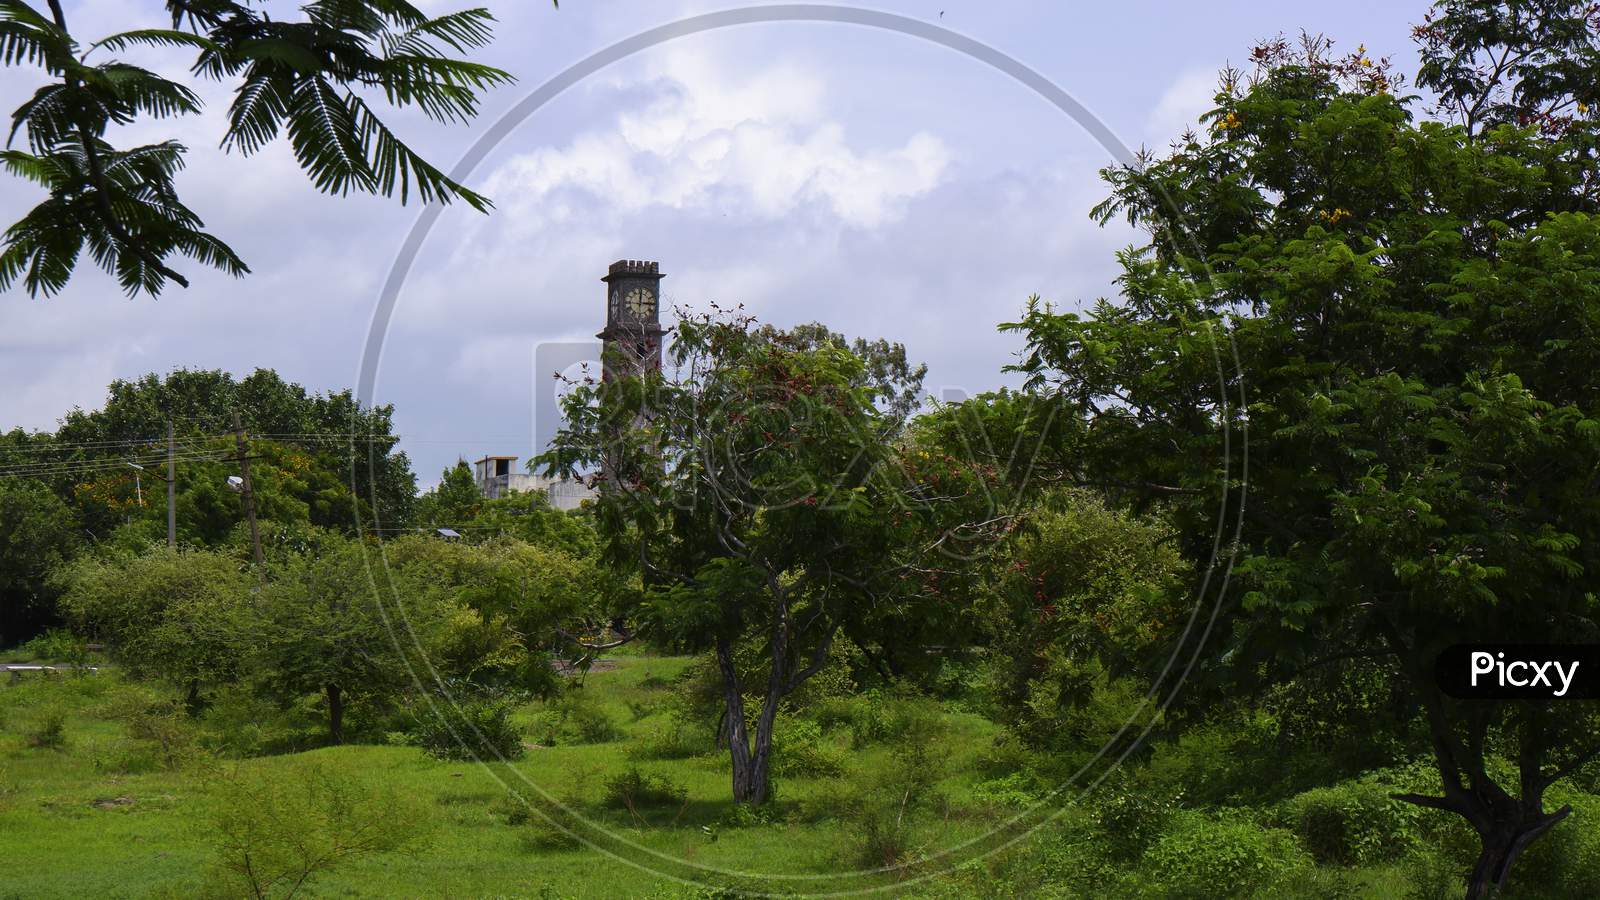 Clock Tower Isolated In Nature